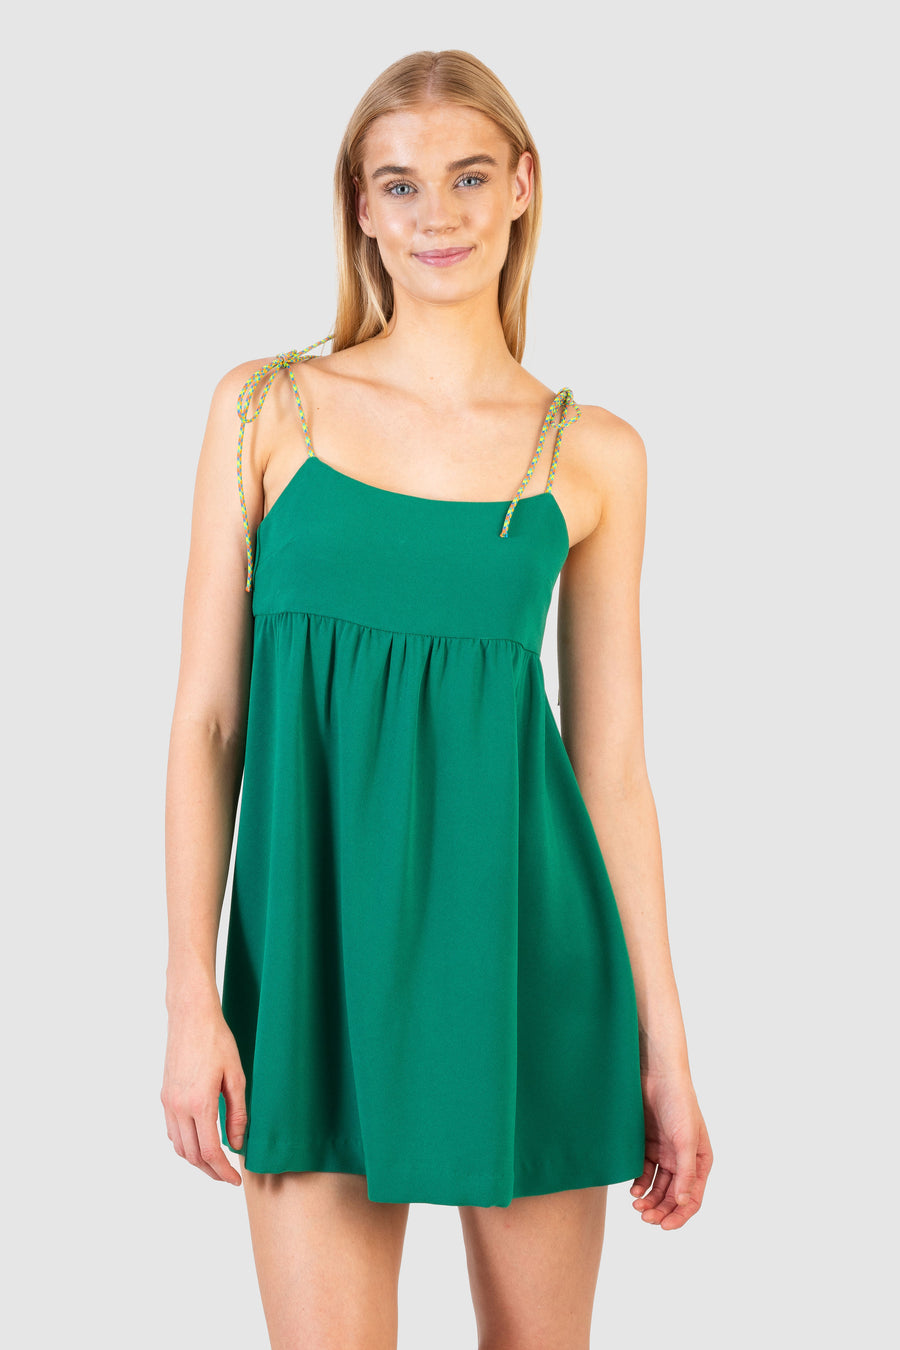 Alexis Dress Green *Limited*Edition*